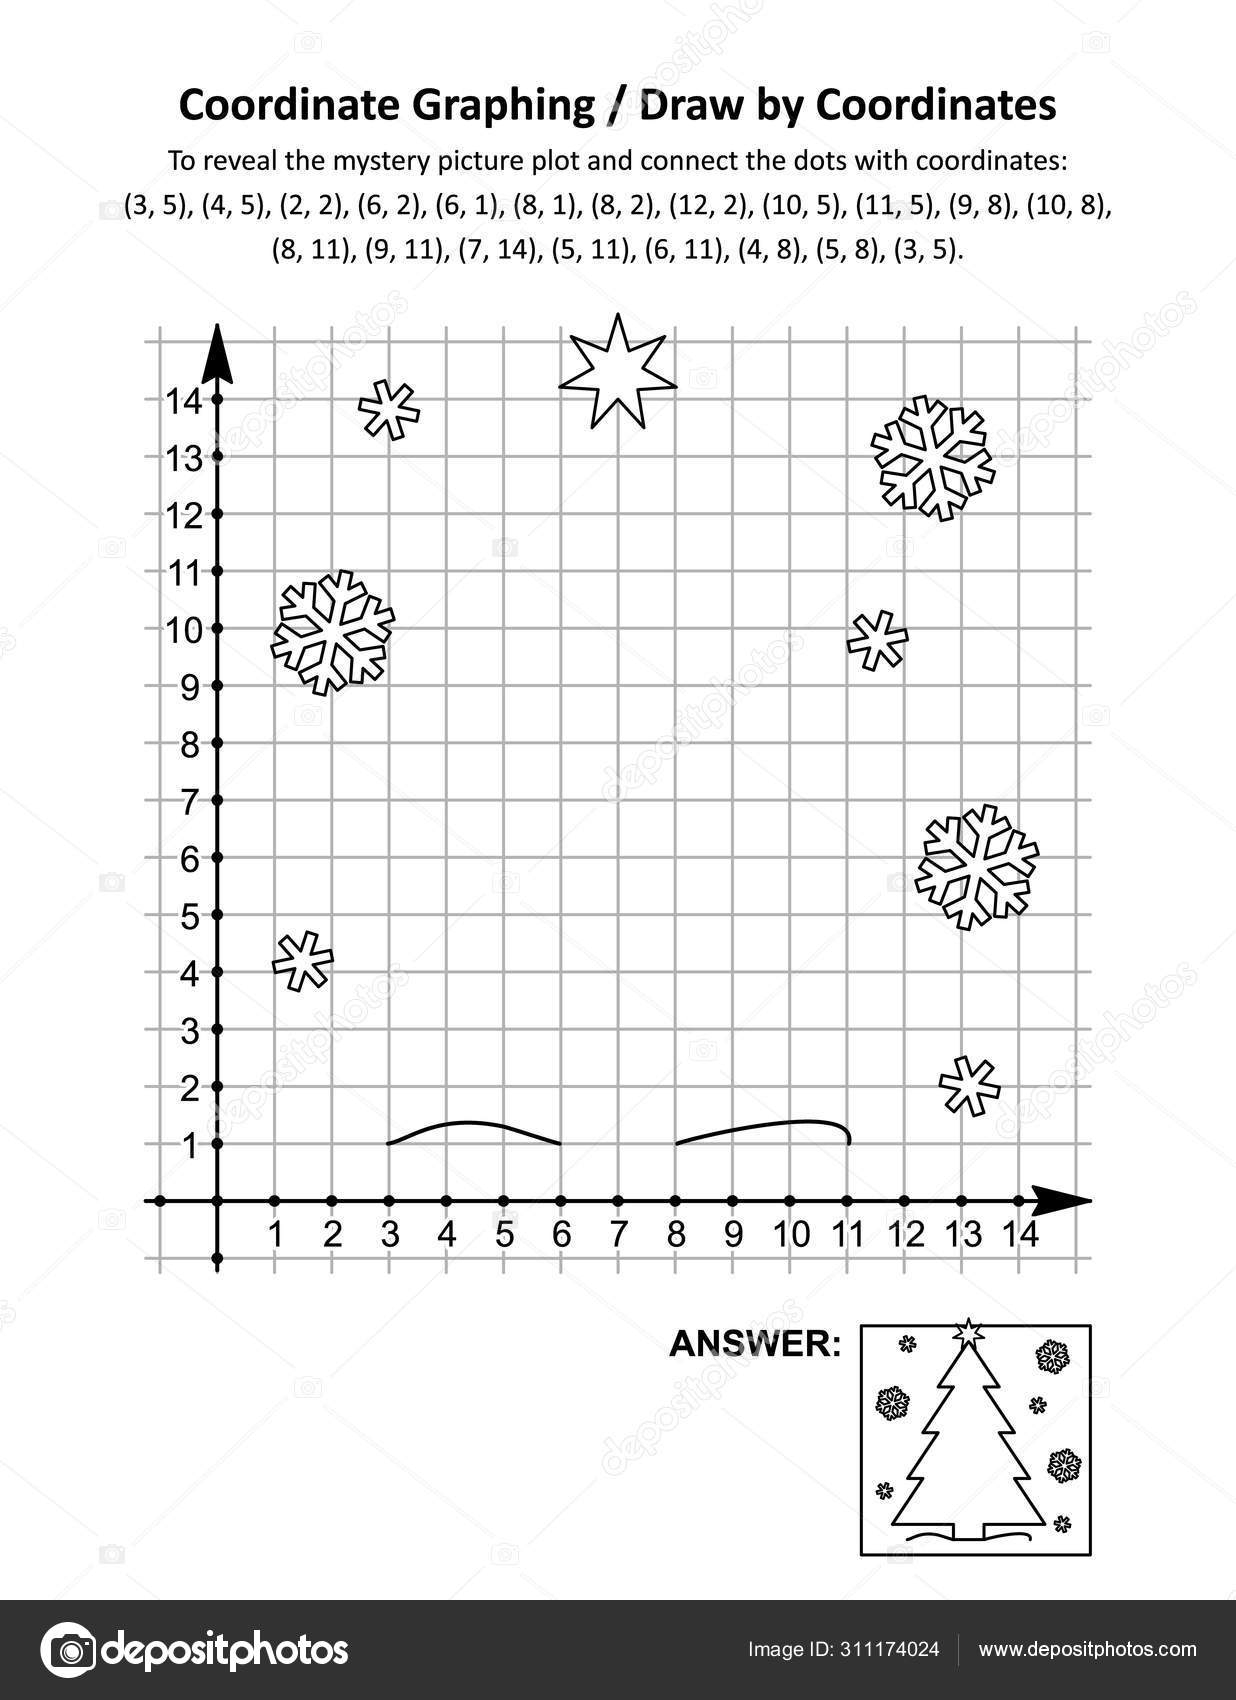 Coordinate Graphing, Or Drawcoordinates, Math Worksheet With Christmas  Tree: To Reveal The Mystery Picture Plot And Connect The Dots With Given